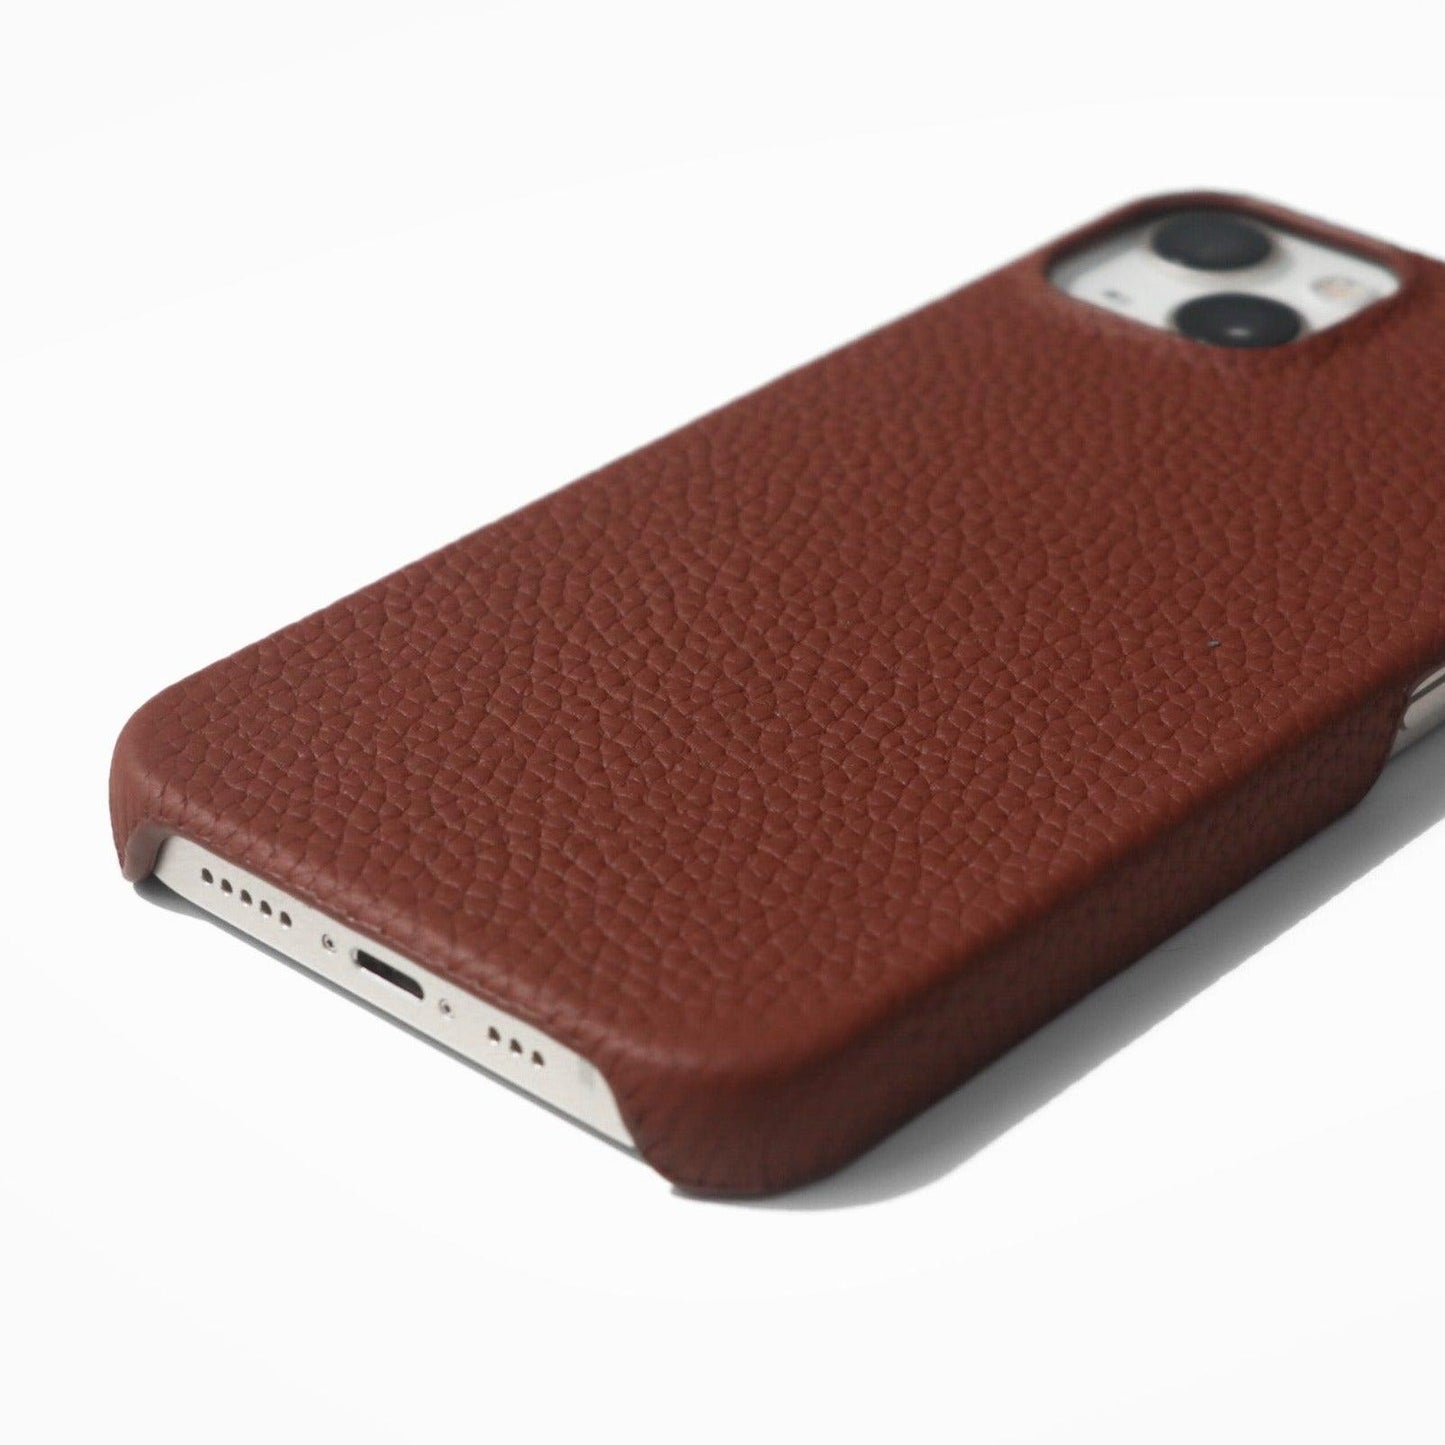 iPhone Thin Case - Wood Brown